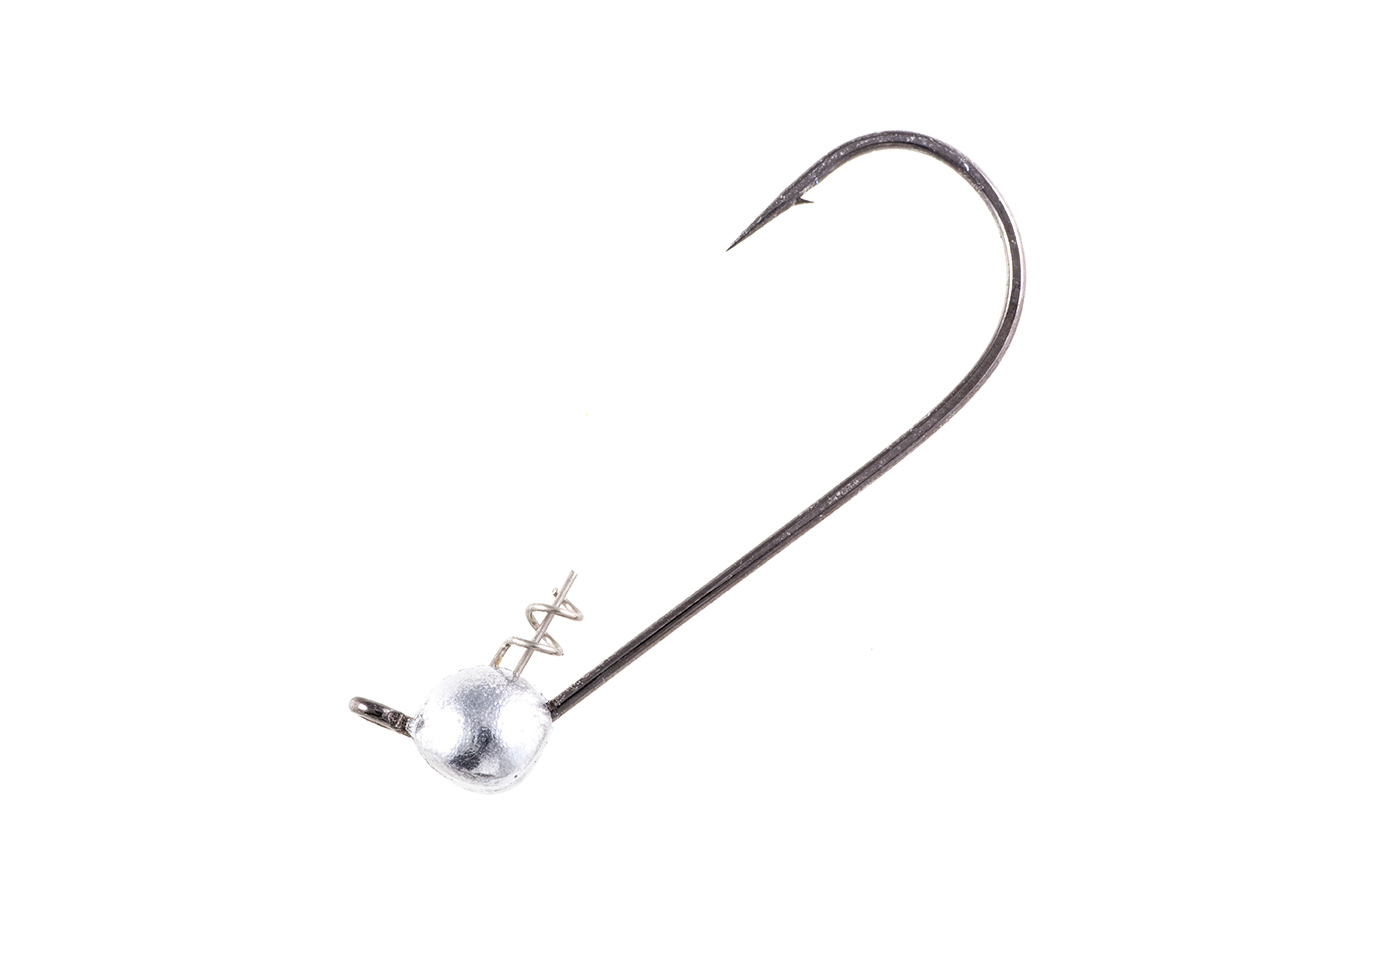 The Closer Shakey Head - Modern Outdoor Tackle